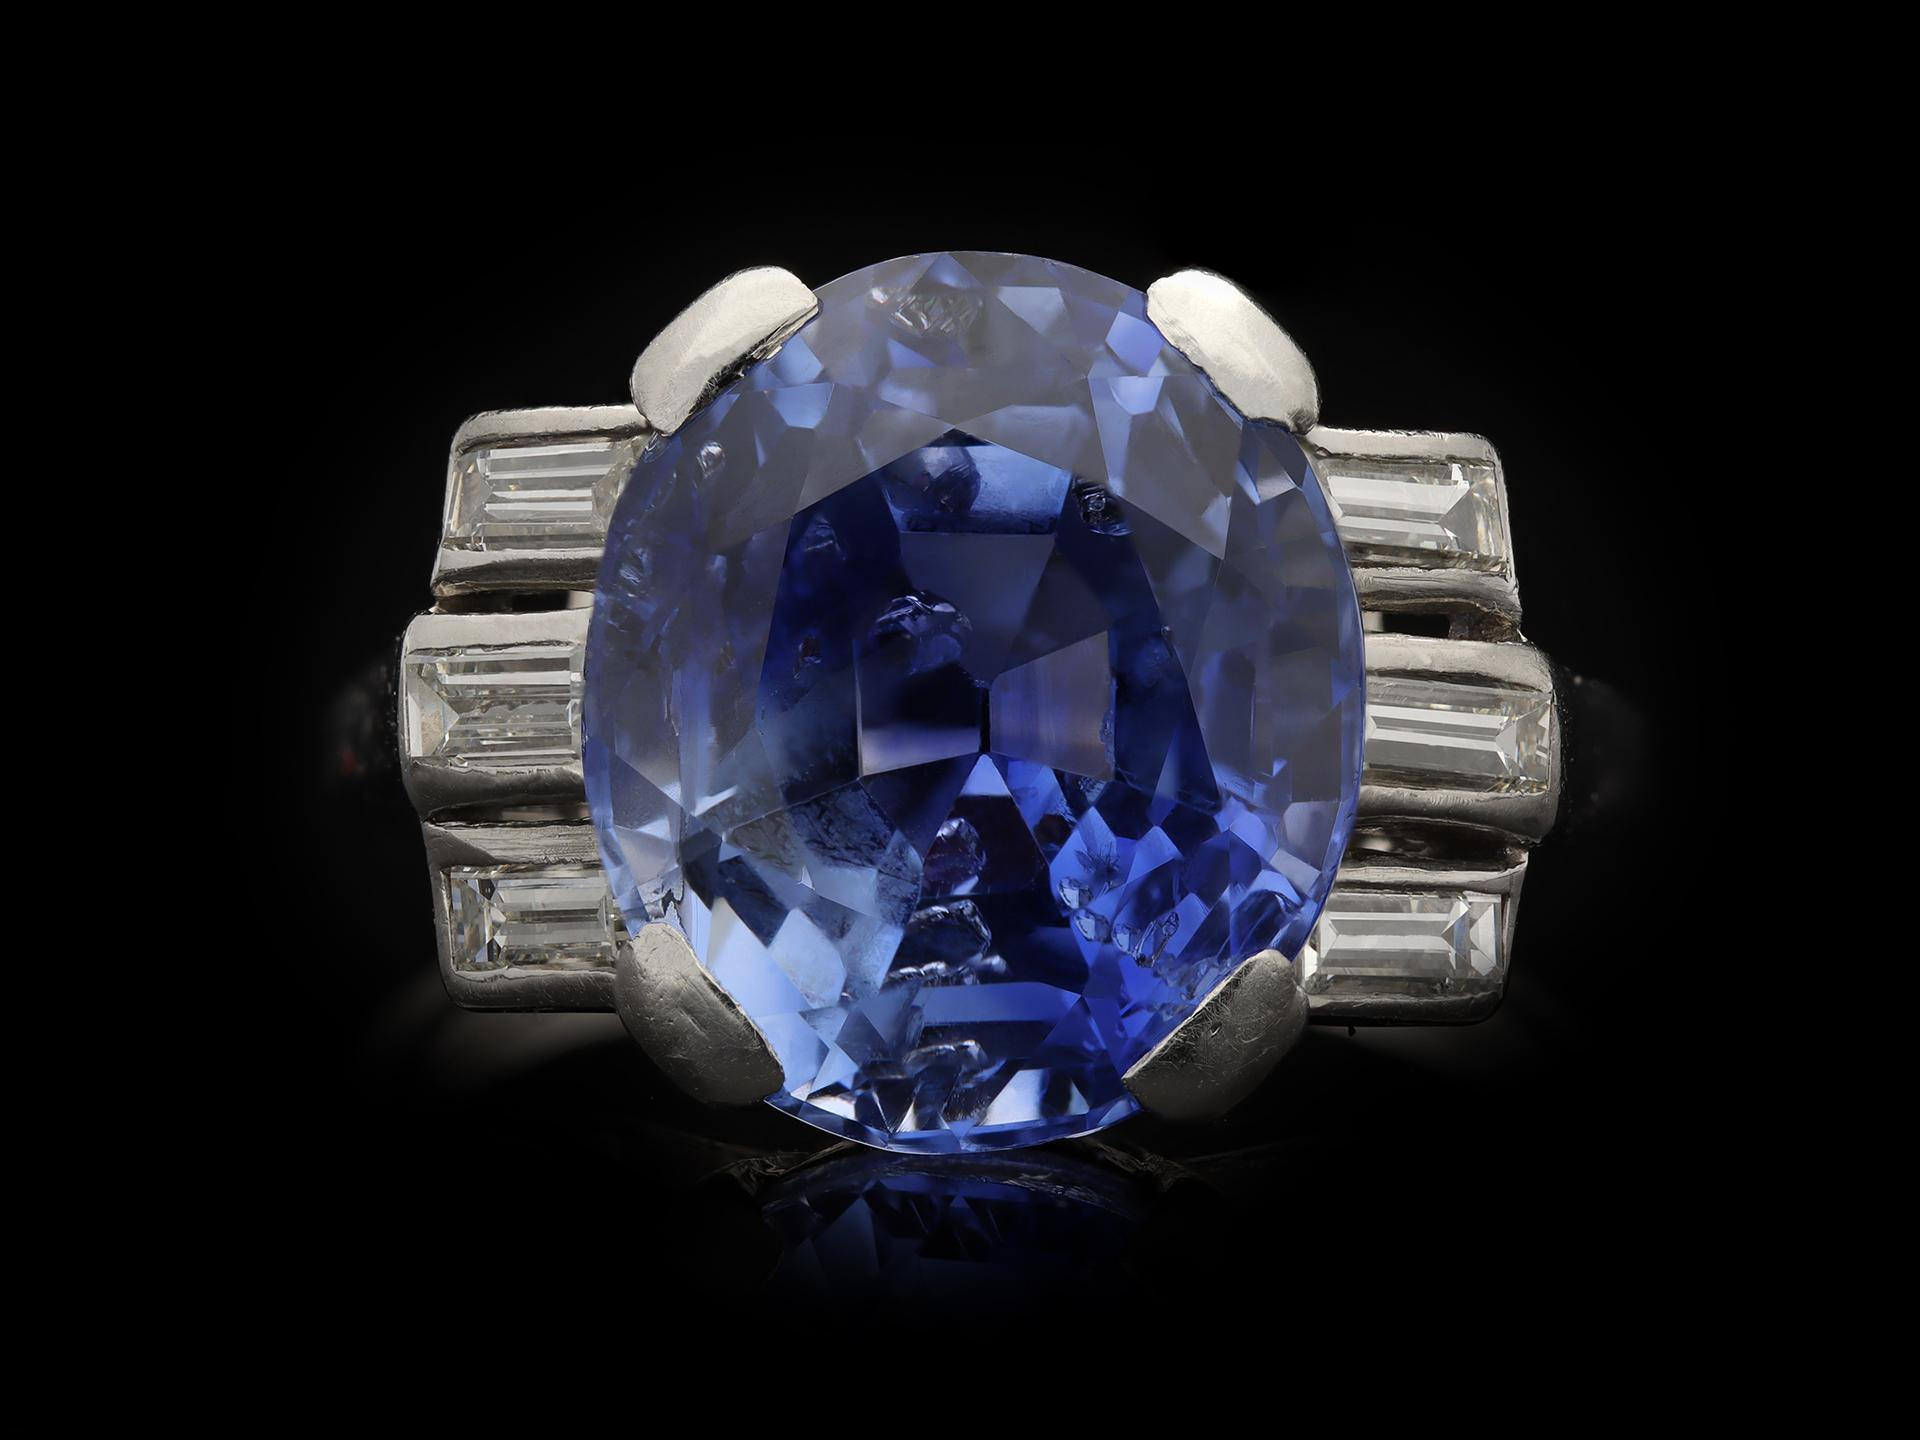 Ceylon sapphire and diamond ring. Centrally set with an oval old cut natural unenhanced Ceylon sapphire in an open back claw setting with an approximate weight of 9.30 carats, flanked by six horizontally set rectangular baguette cut diamonds in open